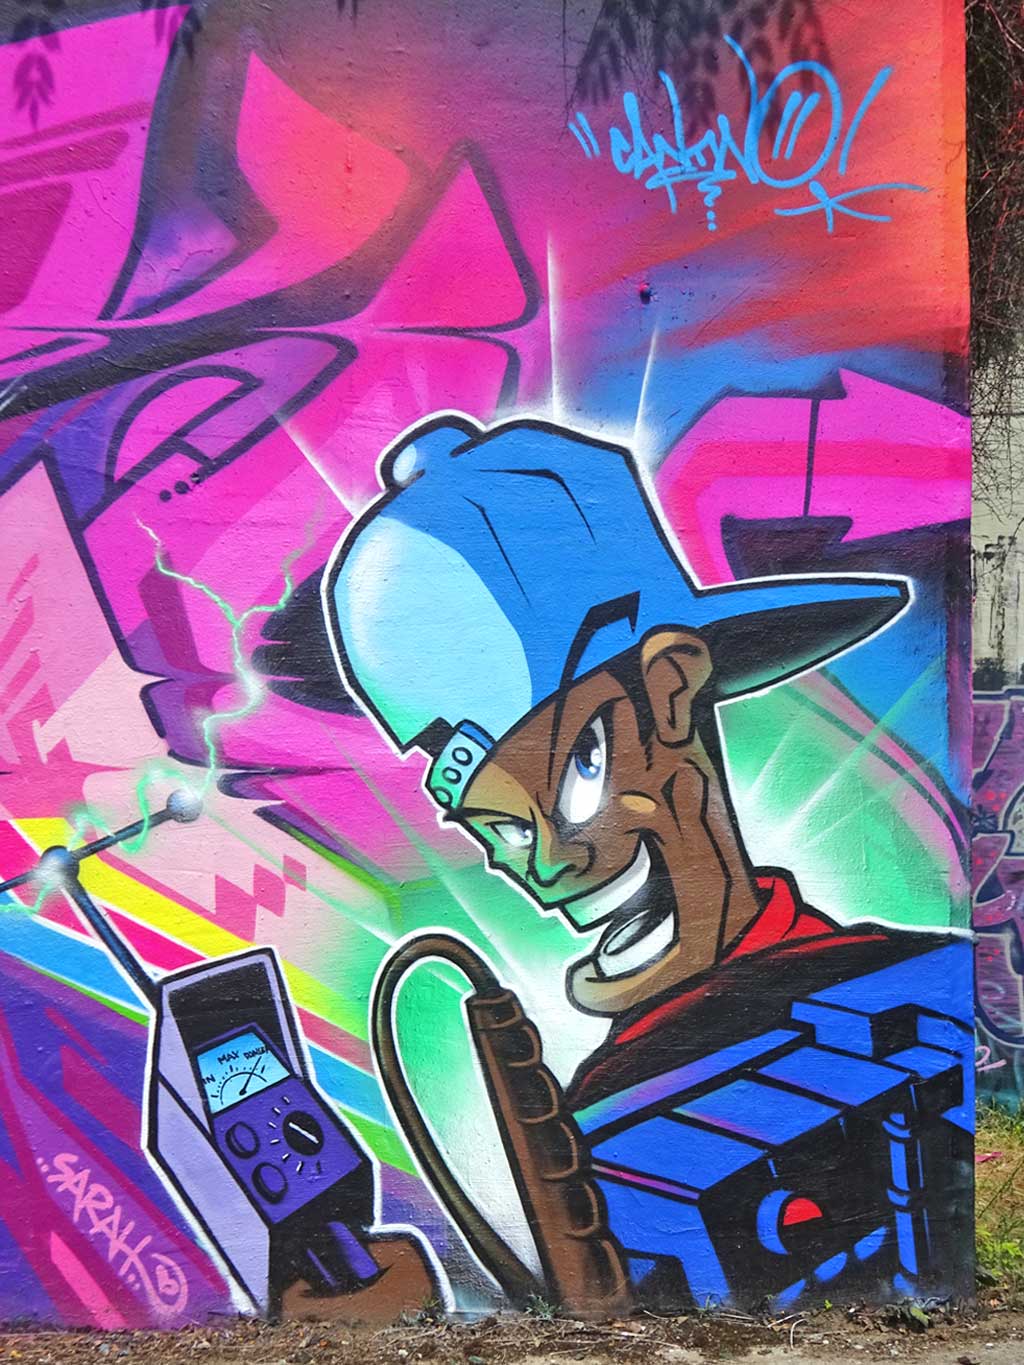 Meeting of Styles Wiesbaden 2019 - Dater 127, SPK und Can Two